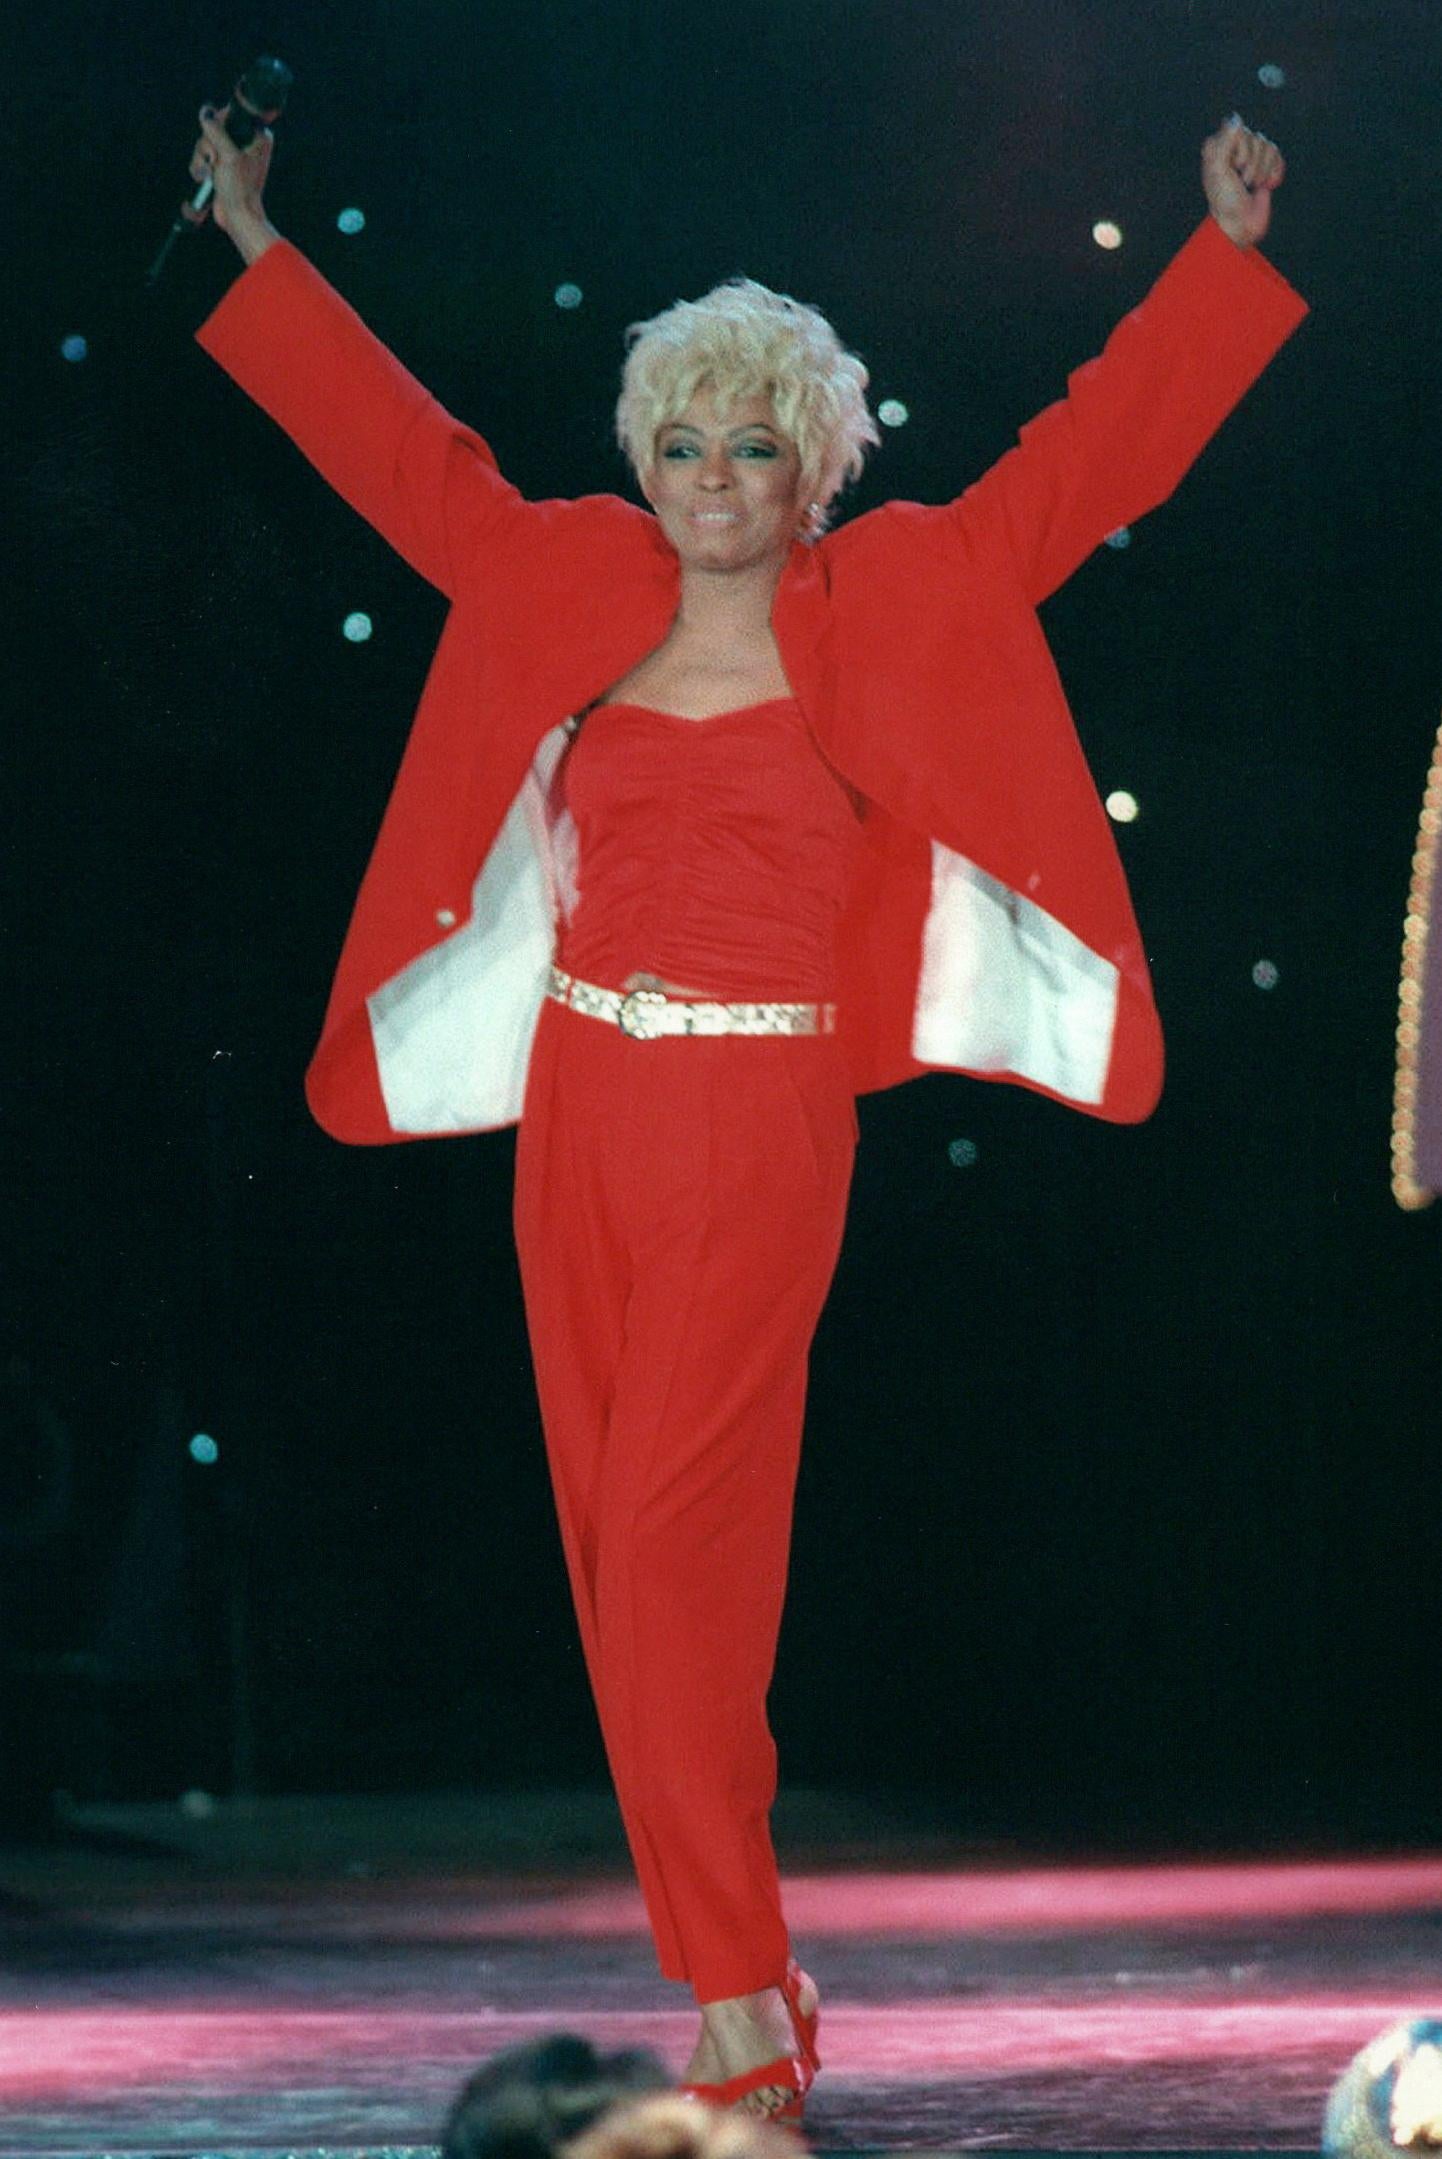 Paul Smith Color Photograph - Diana Ross in Red for The World Music Awards Vintage Original Photograph